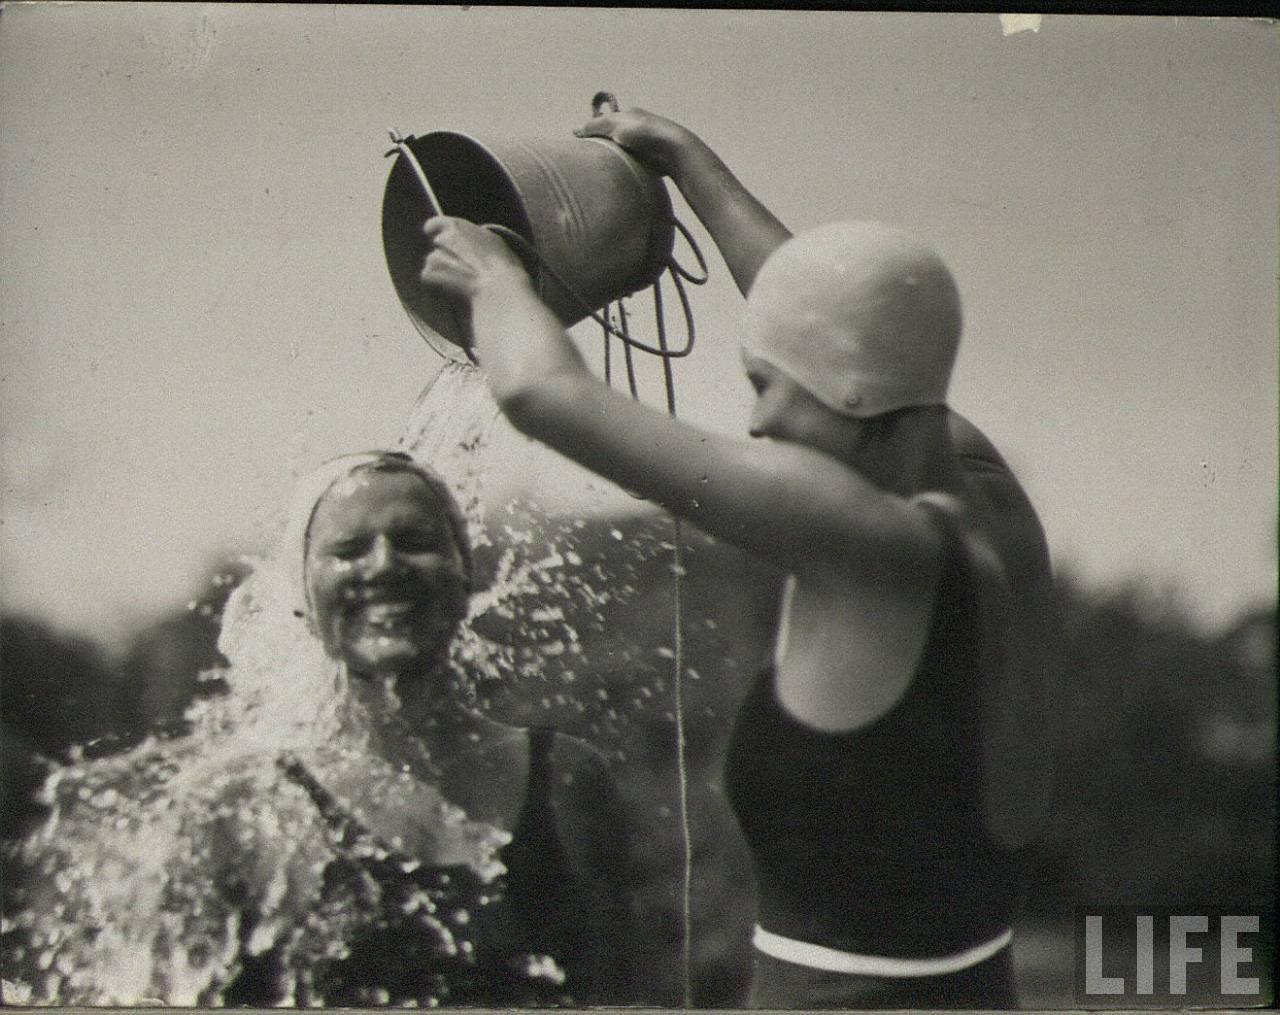 75 Vintage Snapshots That Show What Summer Fun Looked Like From Between